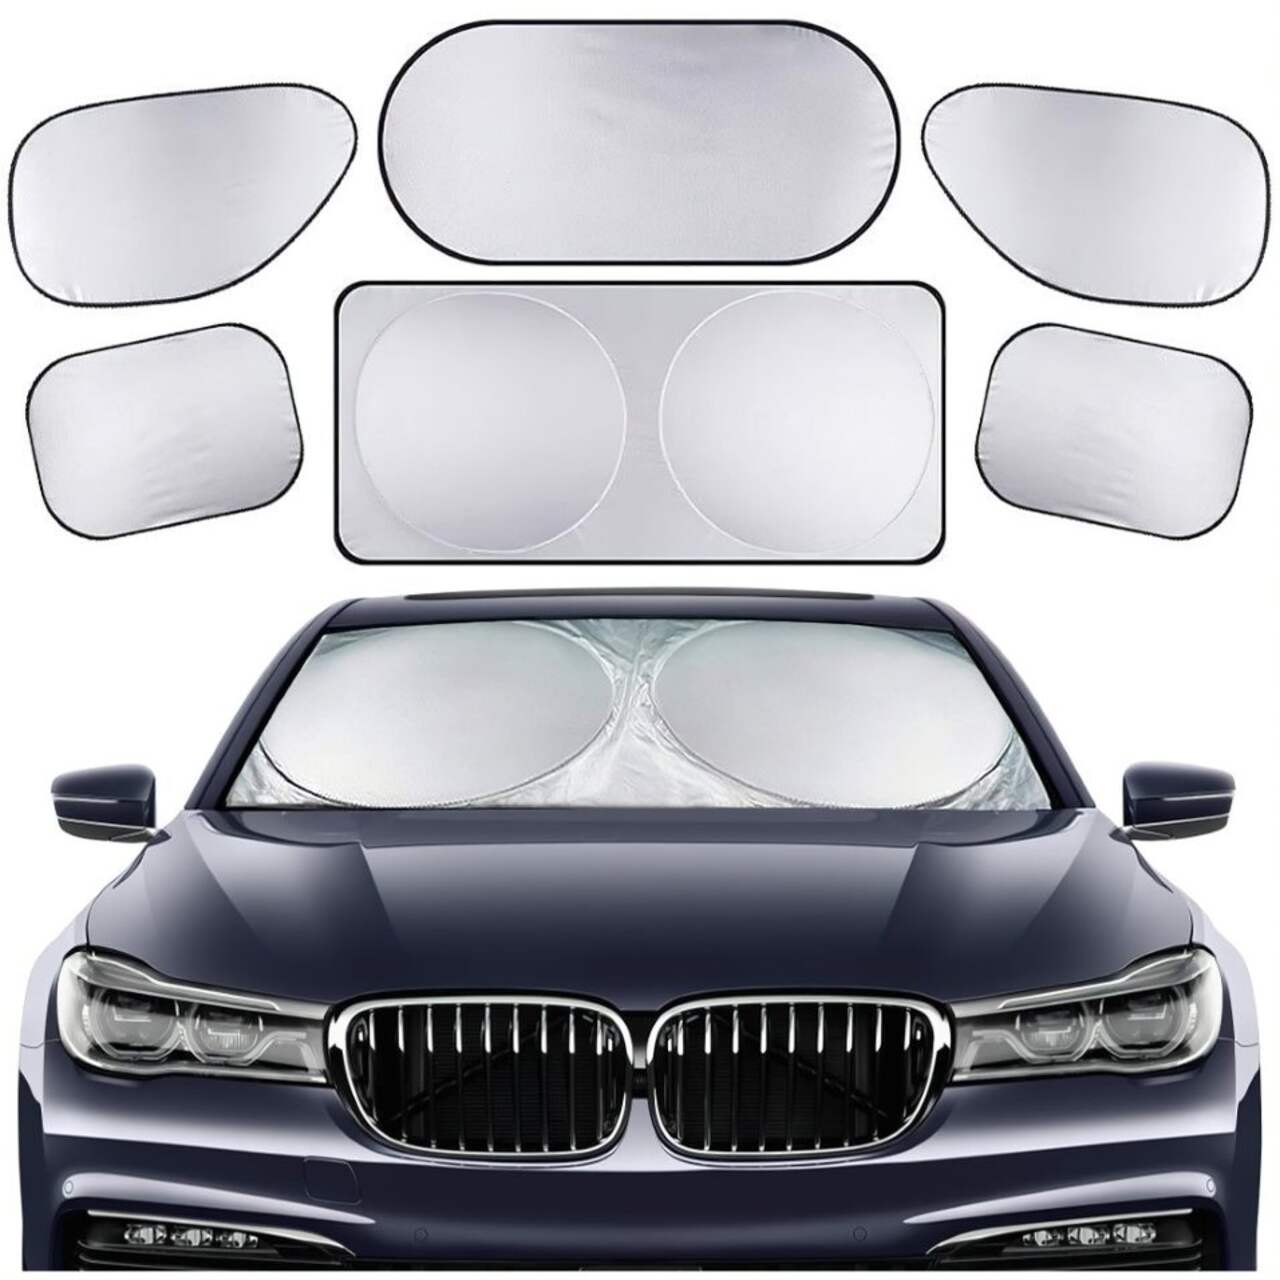 https://media-www.canadiantire.ca/product/automotive/car-care-accessories/auto-accessories/0370771/autotrends-car-sunshade-6-pieces-kit-5c9853f7-8d4b-40bf-a2dd-e60675a3e5ef.png?imdensity=1&imwidth=1244&impolicy=mZoom